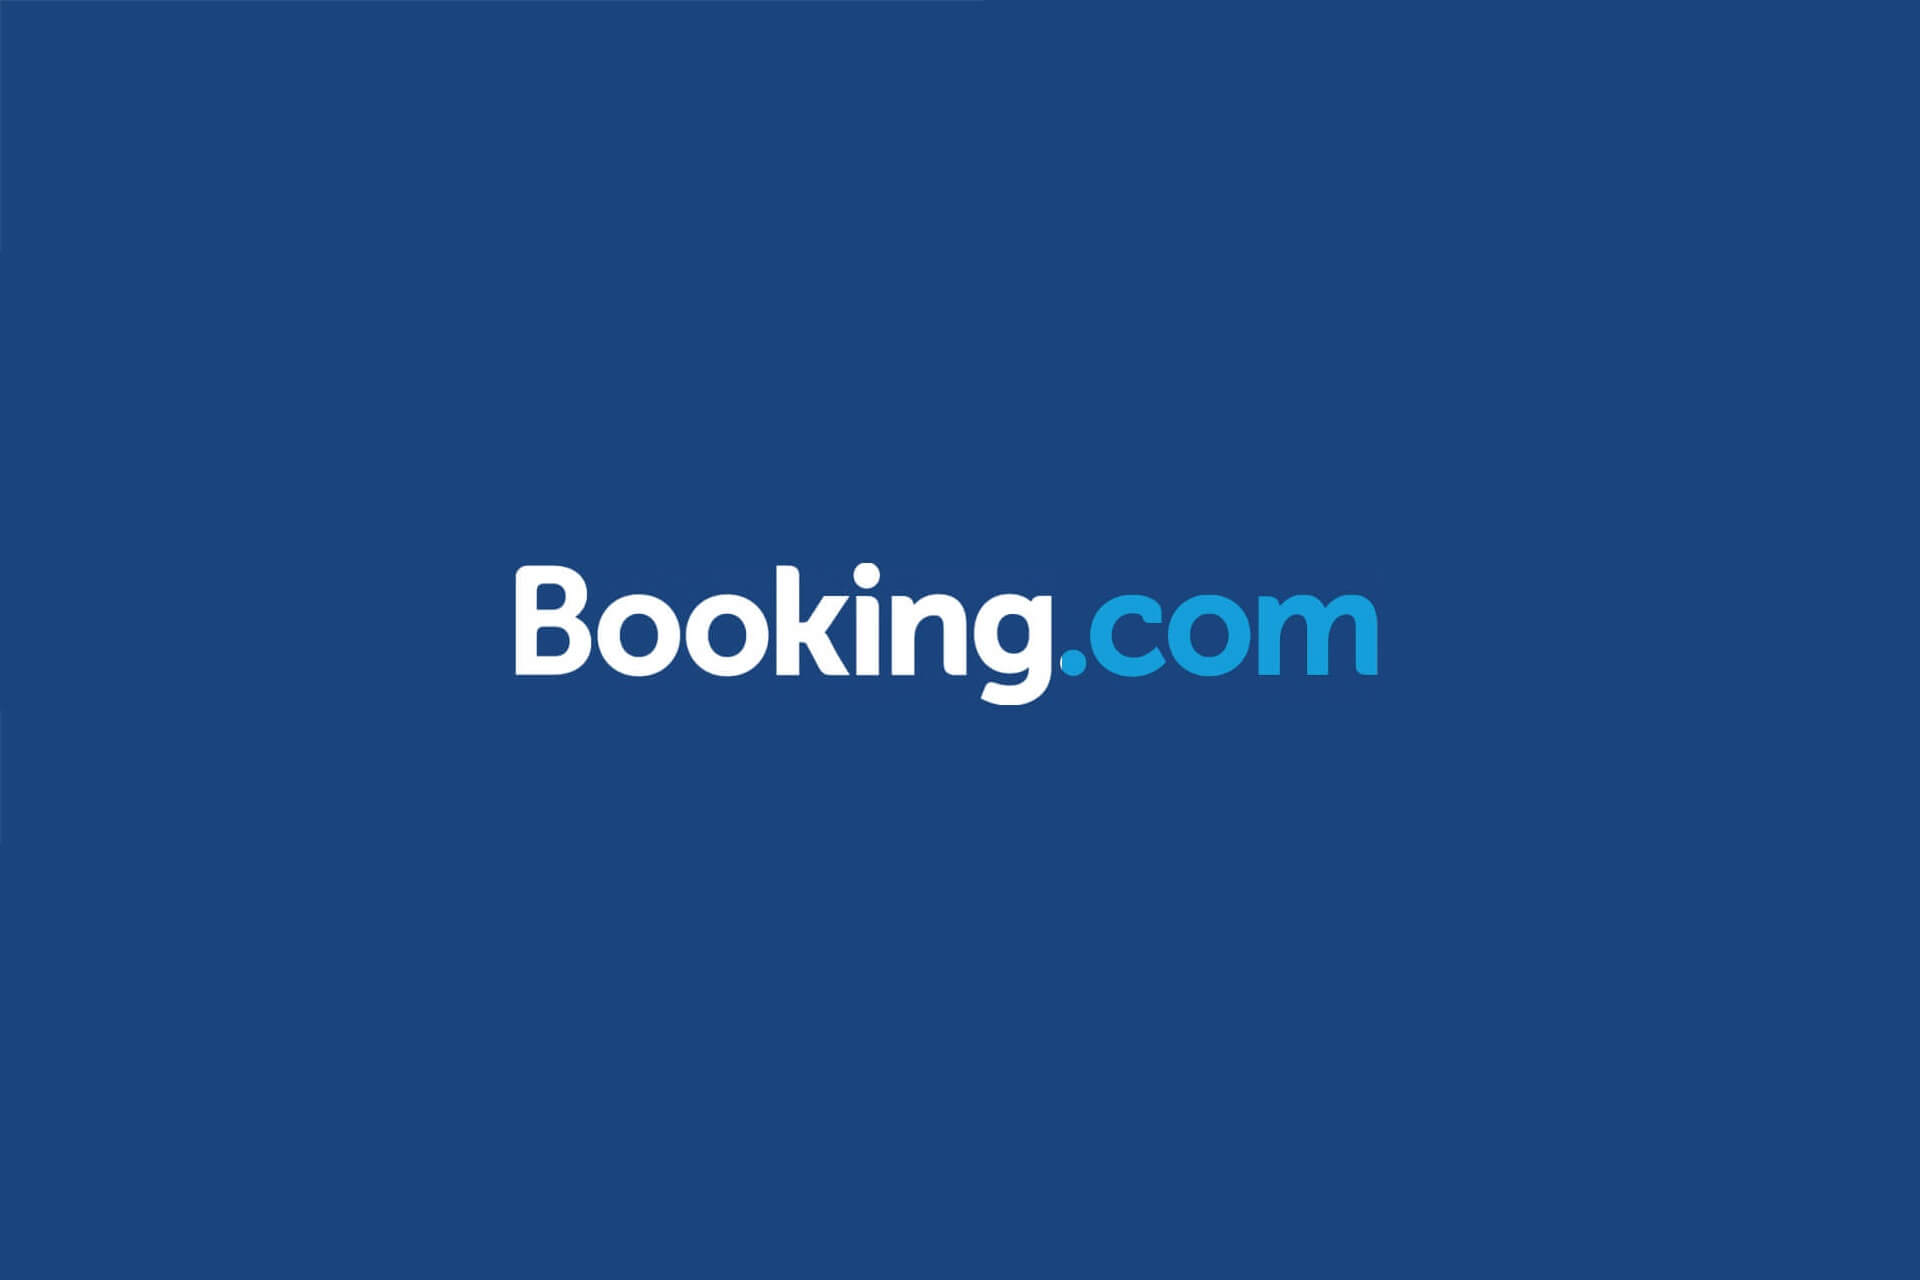 Booking.com Travel Companies in India